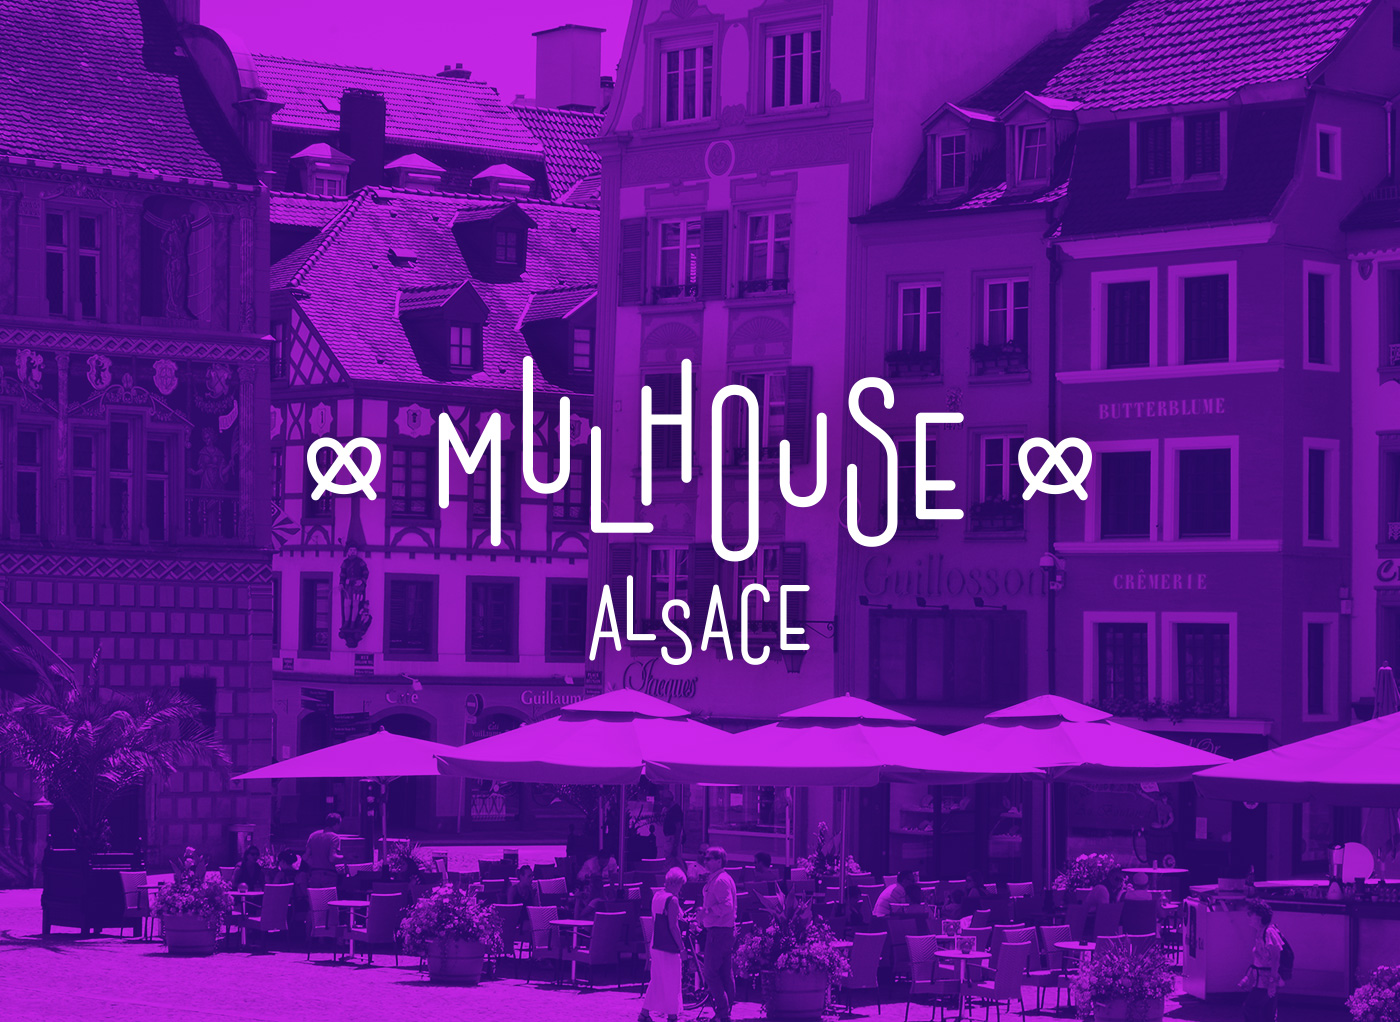 Type design for Mulhouse Alsace